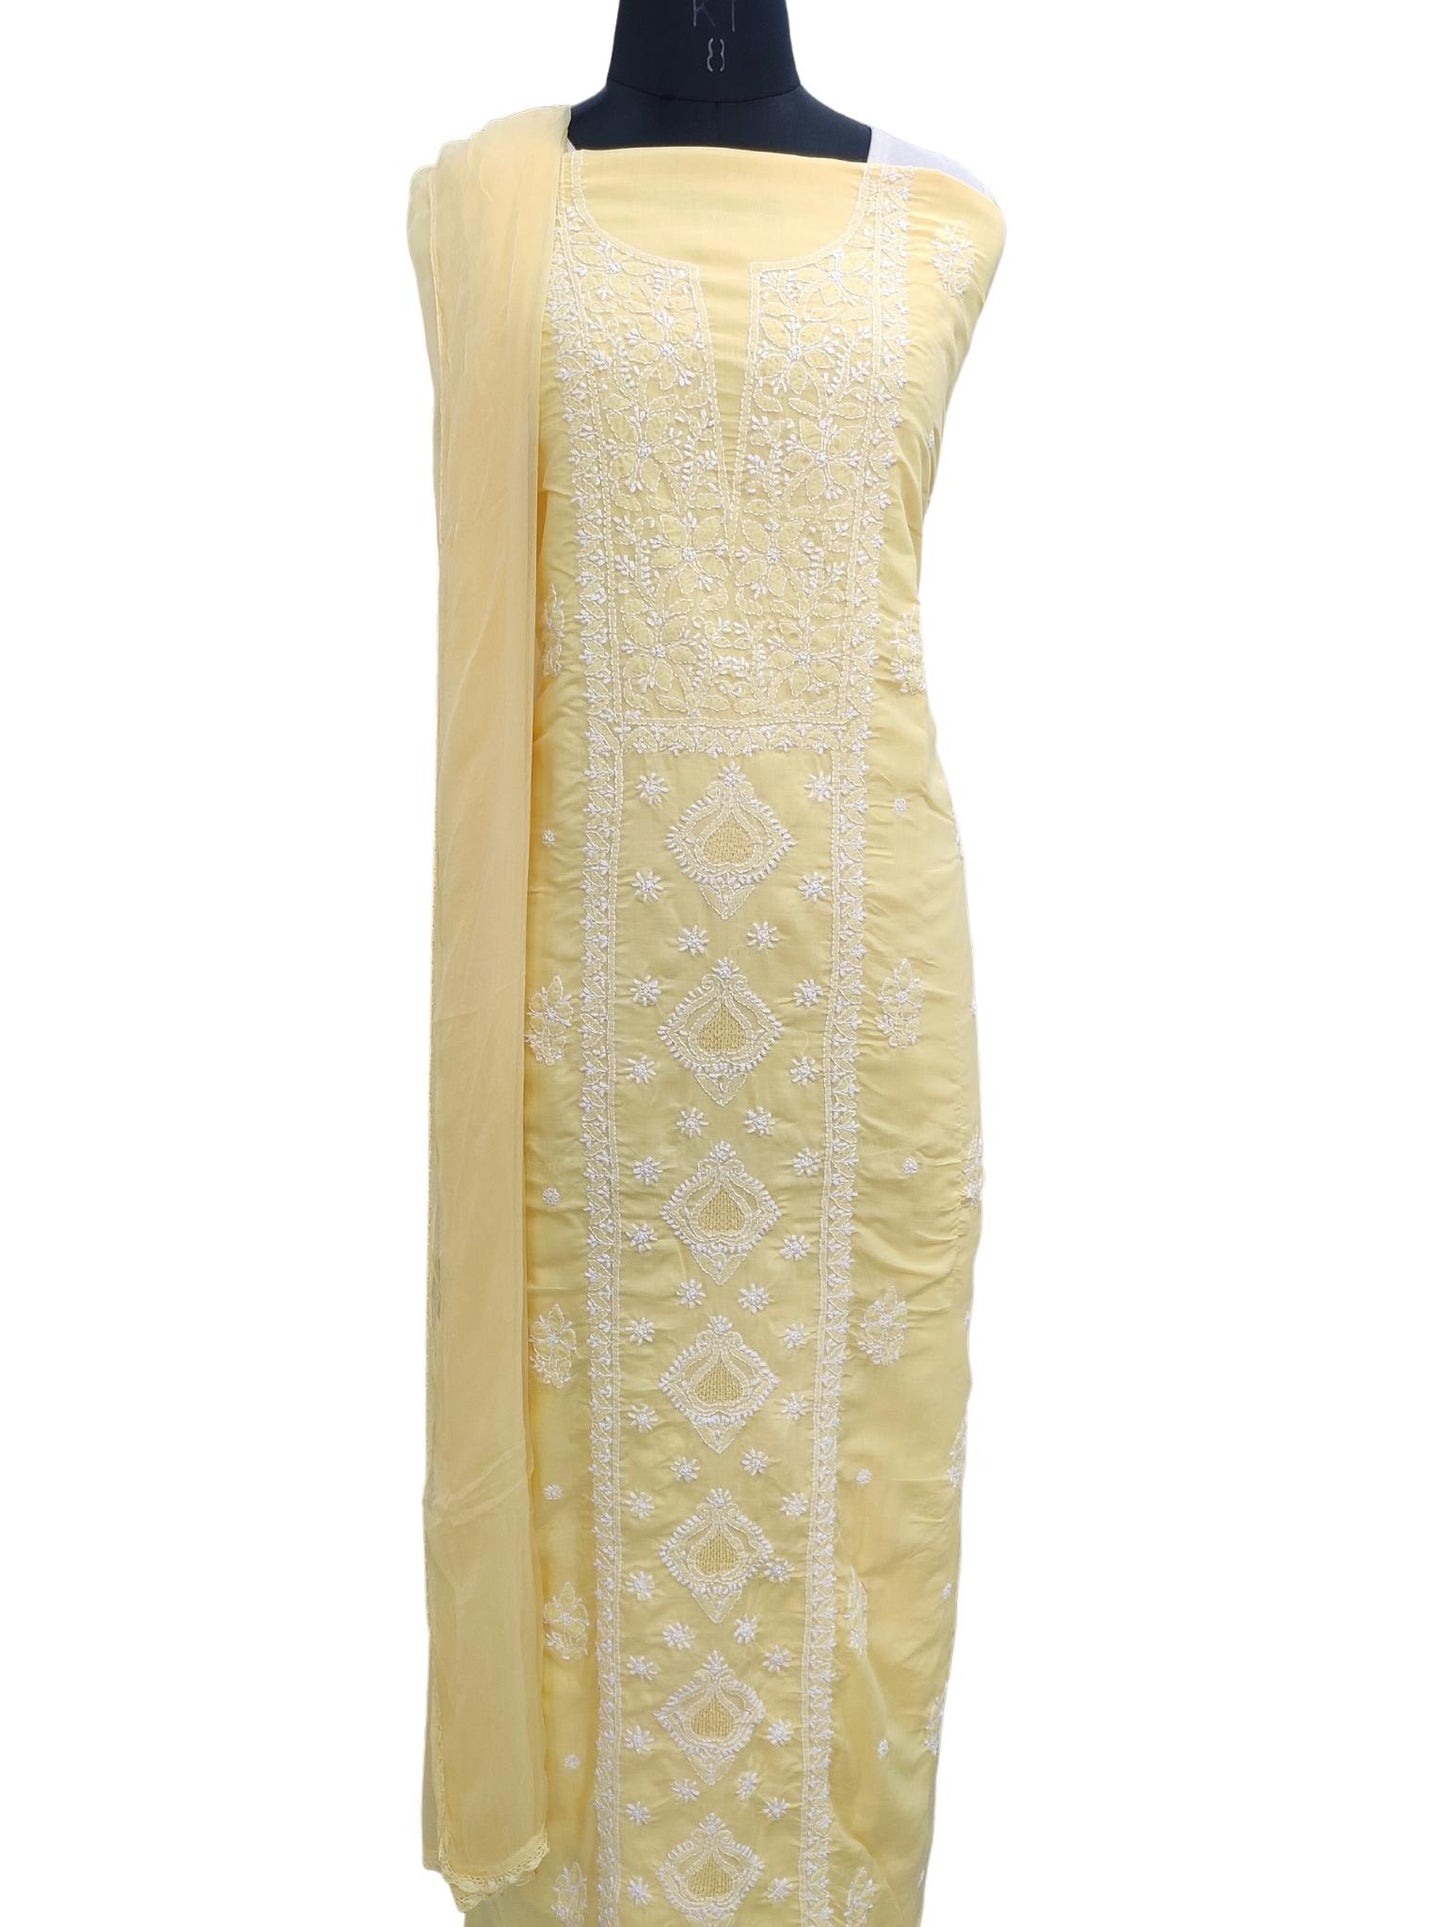 Shyamal Chikan Hand Embroidered Yellow Cotton Lucknowi Chikankari Unstitched Suit Piece With Jaali Work - S19276